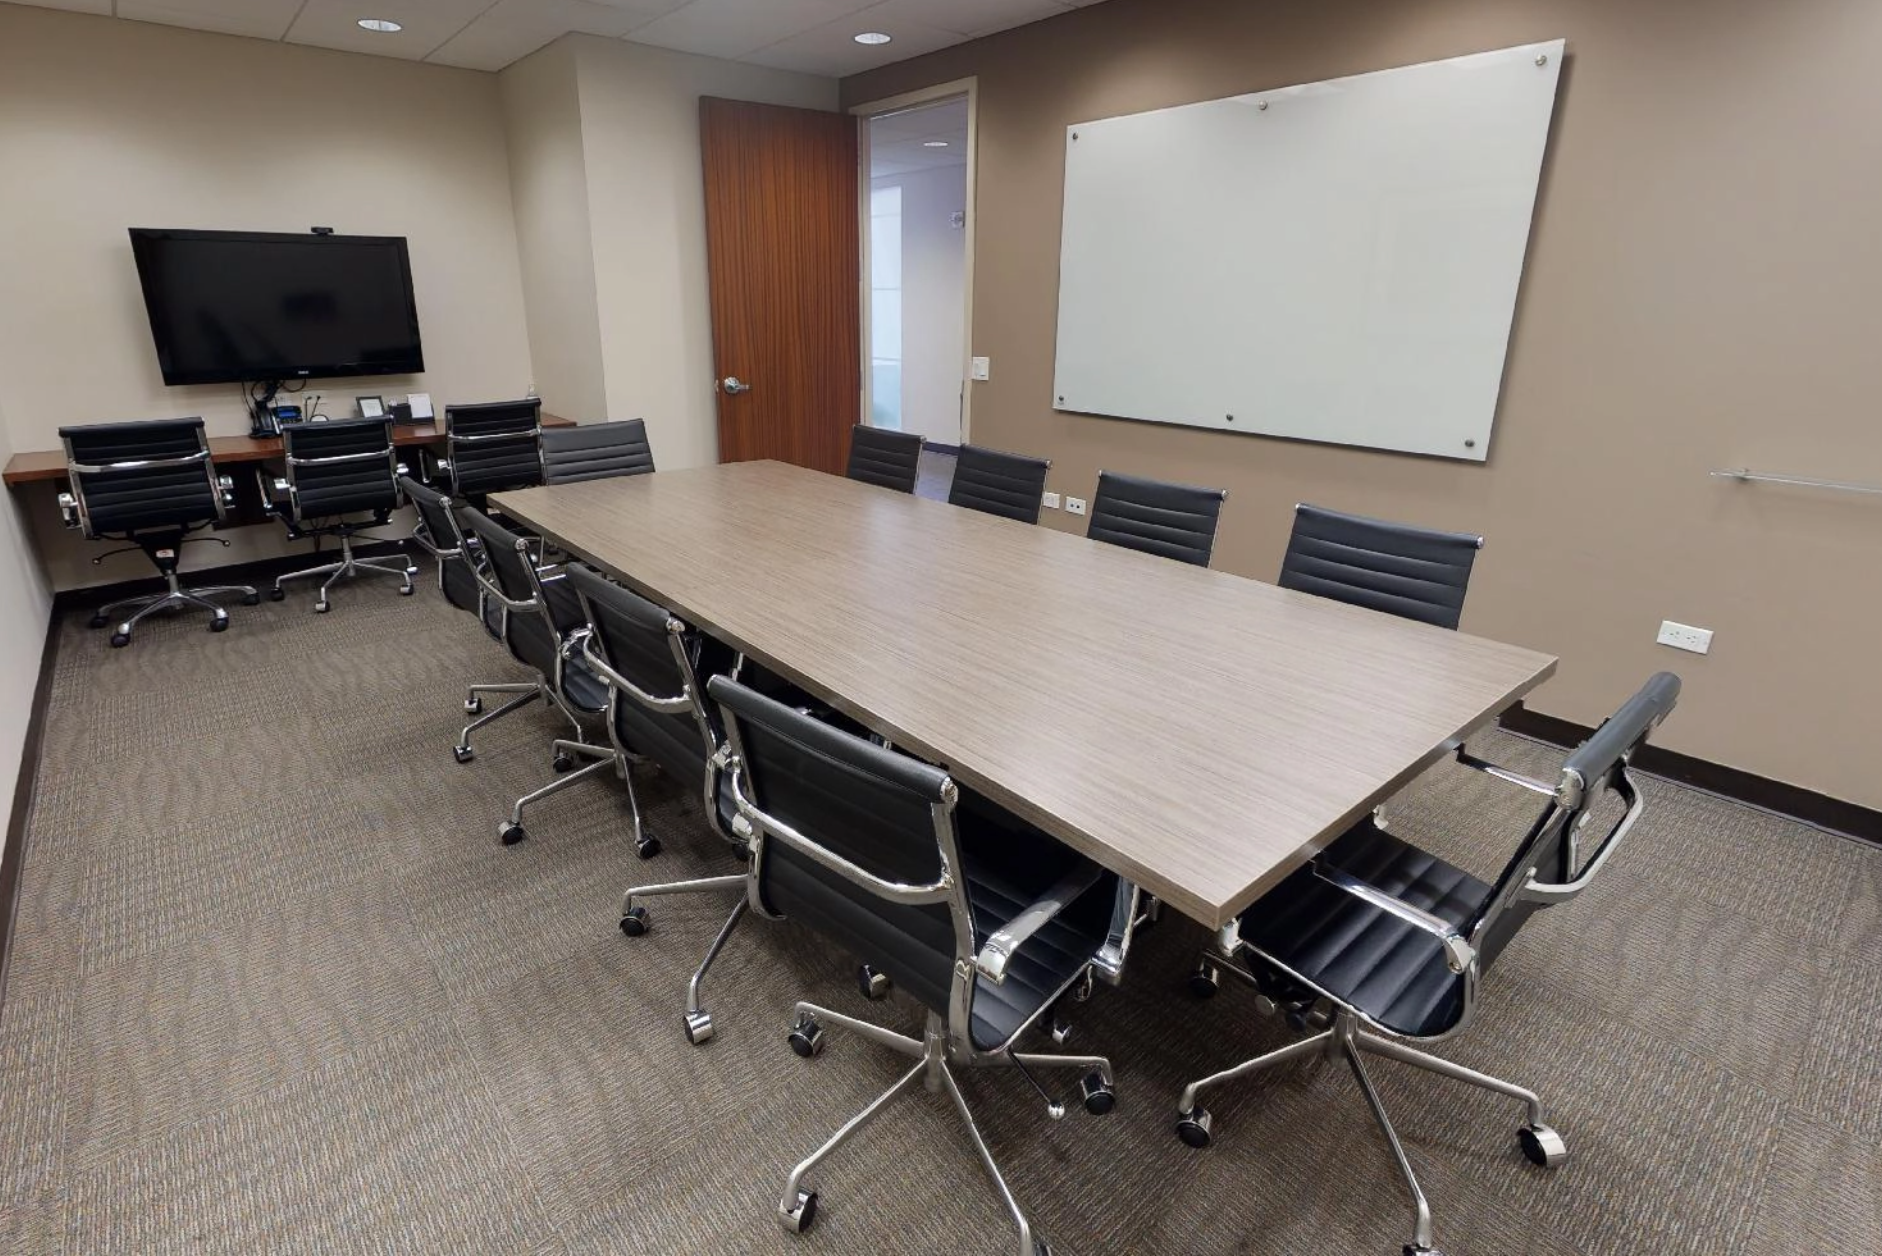 757-Third-Avenue-20th-21st-Floor-Conference-Room-21B@2x